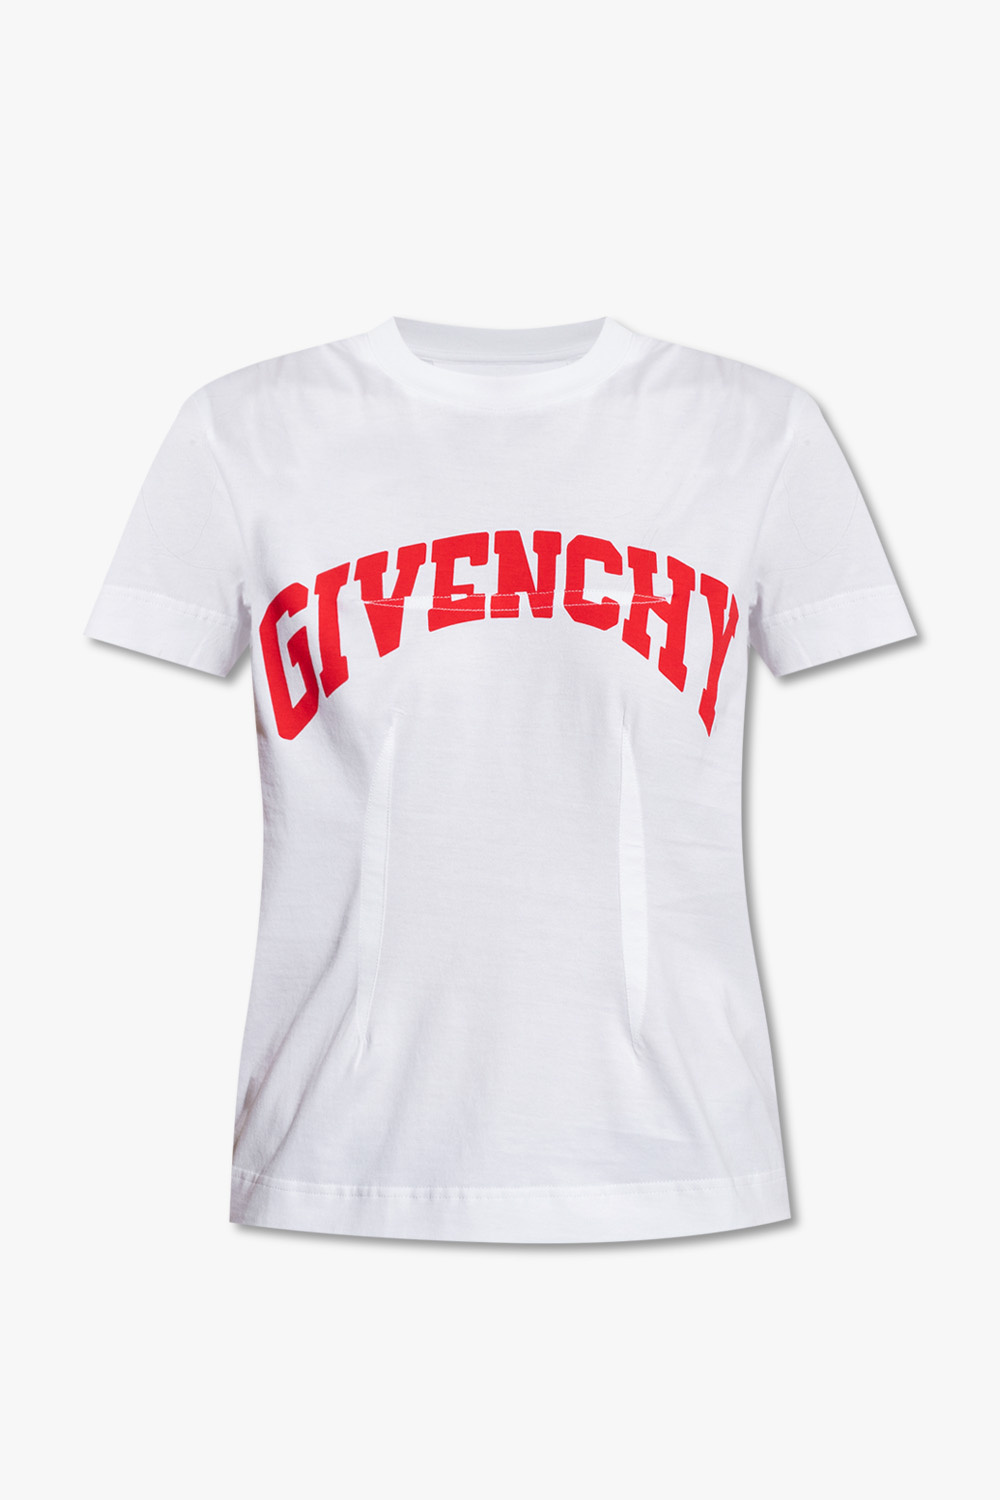 Givenchy Givenchy GIV 1 sock sneakers Black